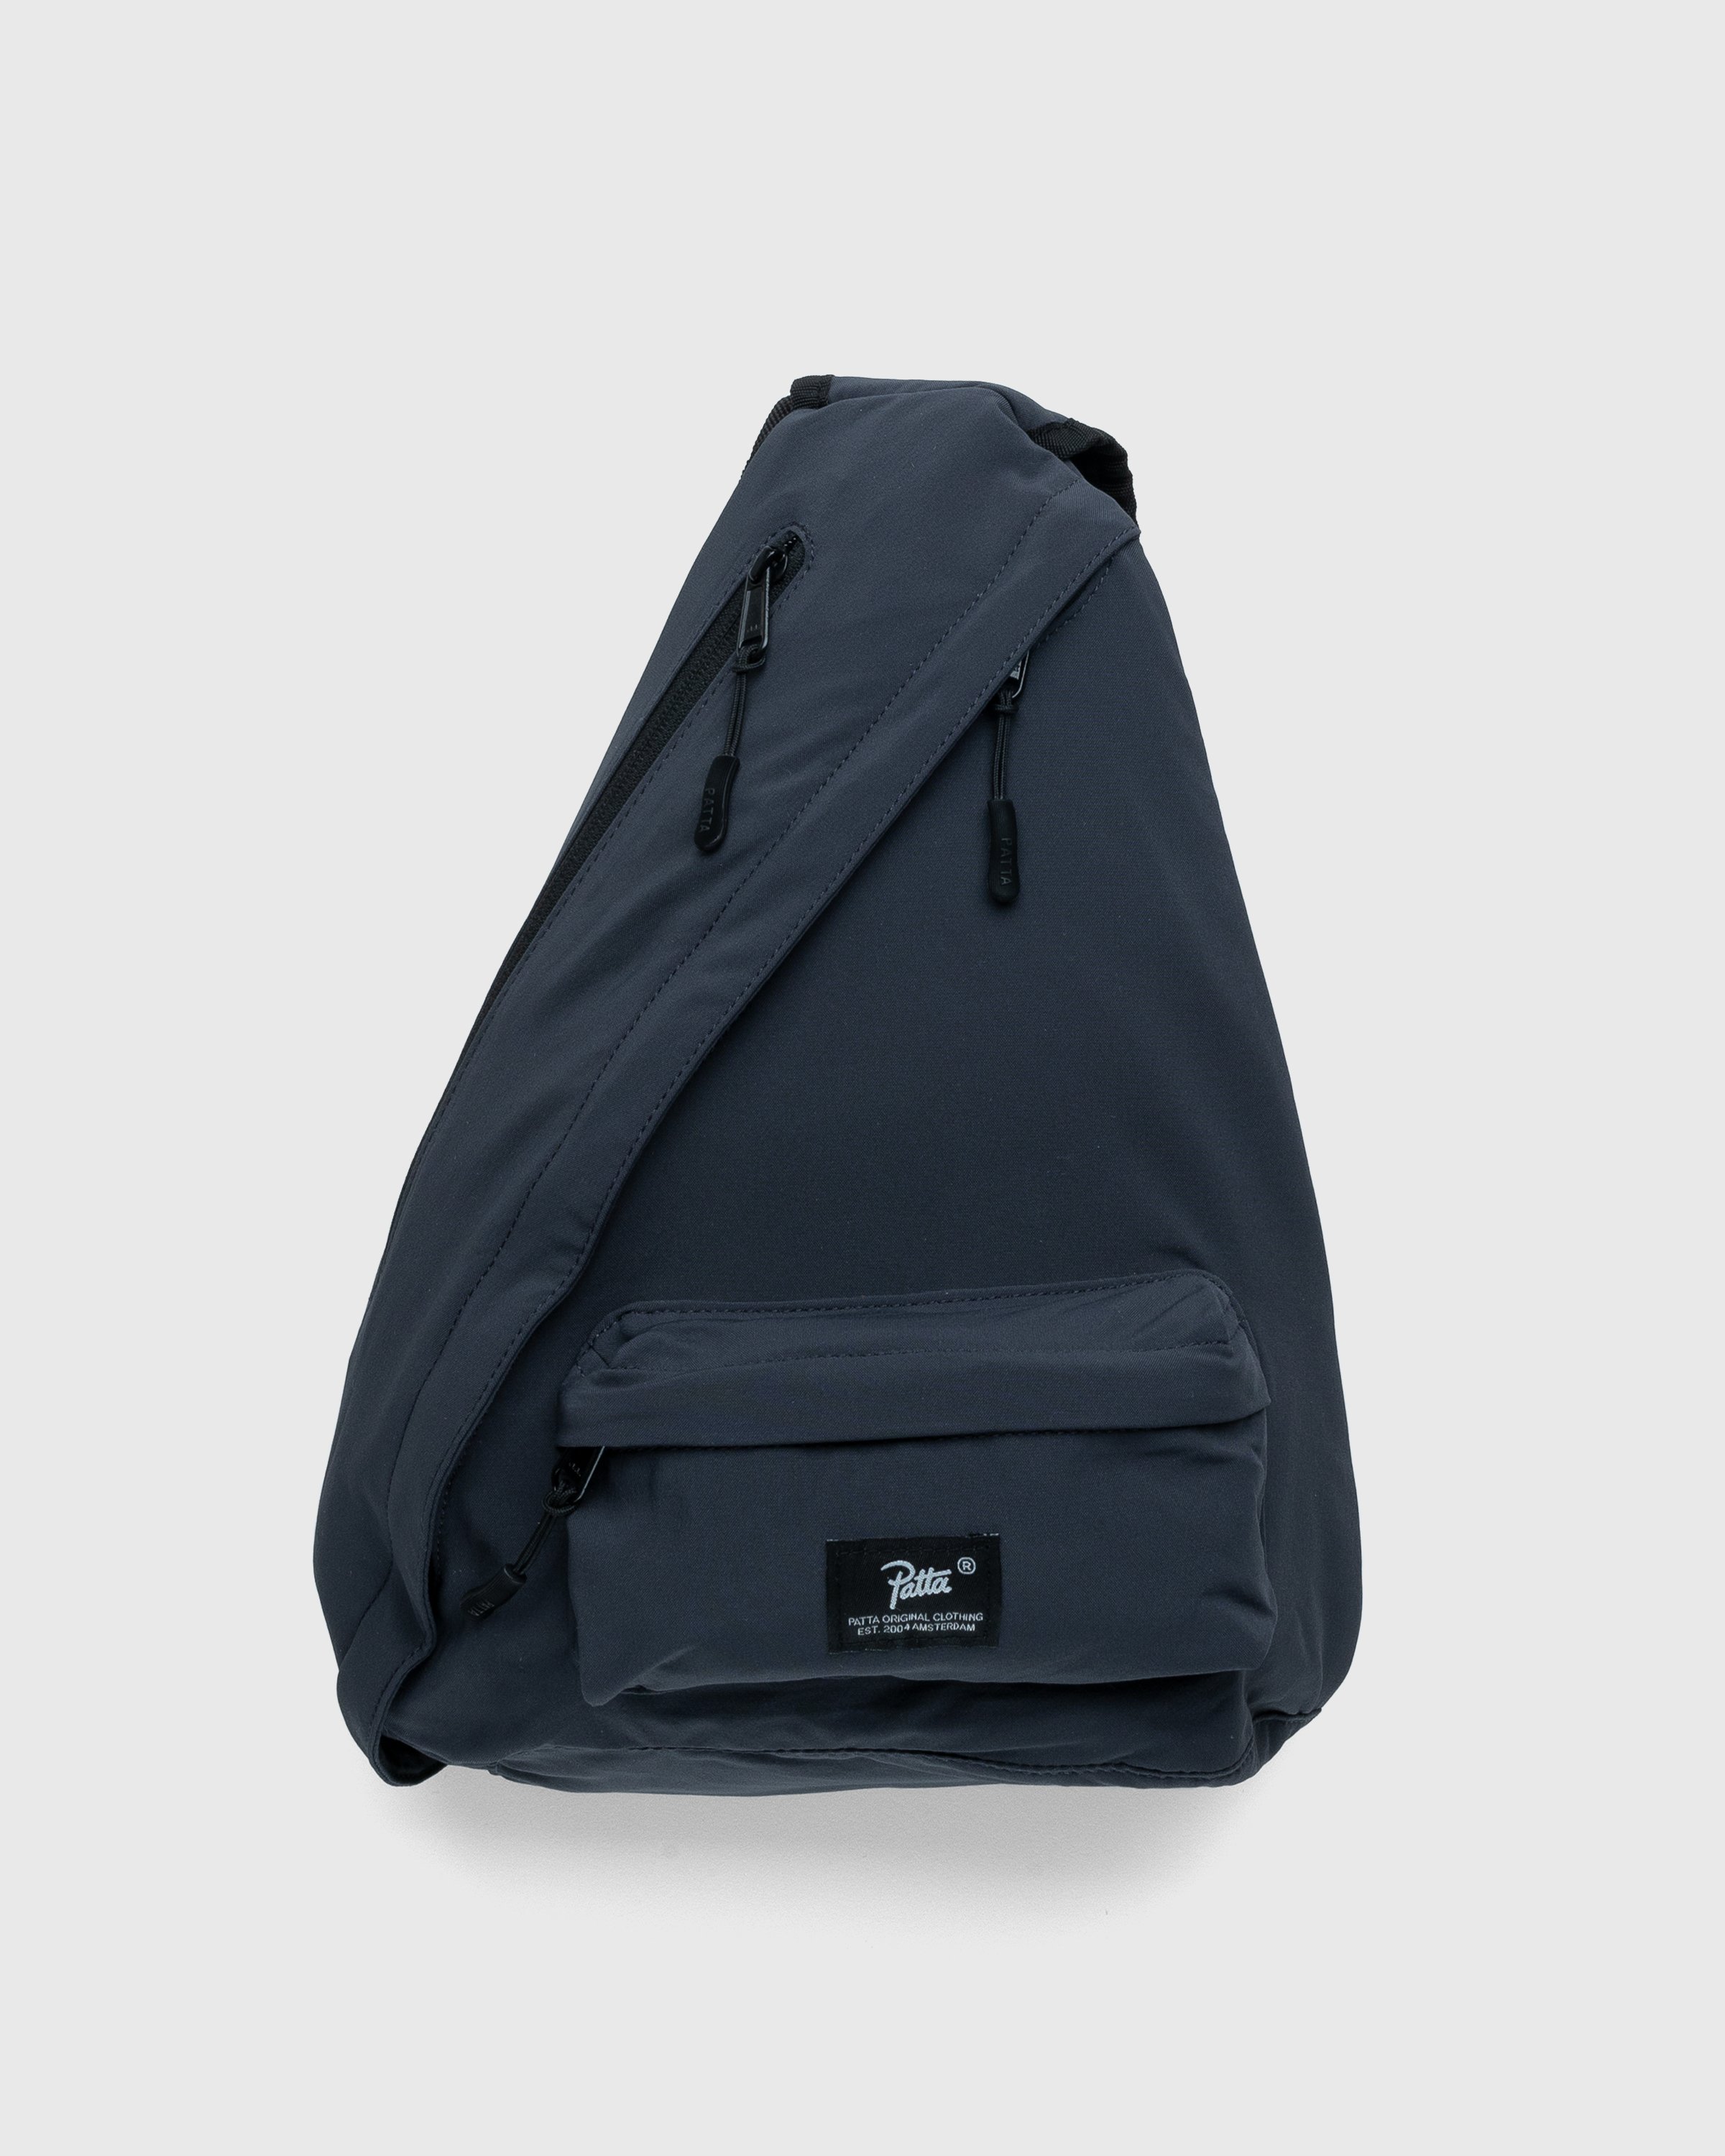 Patta - N039 Sling Bag Charcoal - Accessories - Grey - Image 1